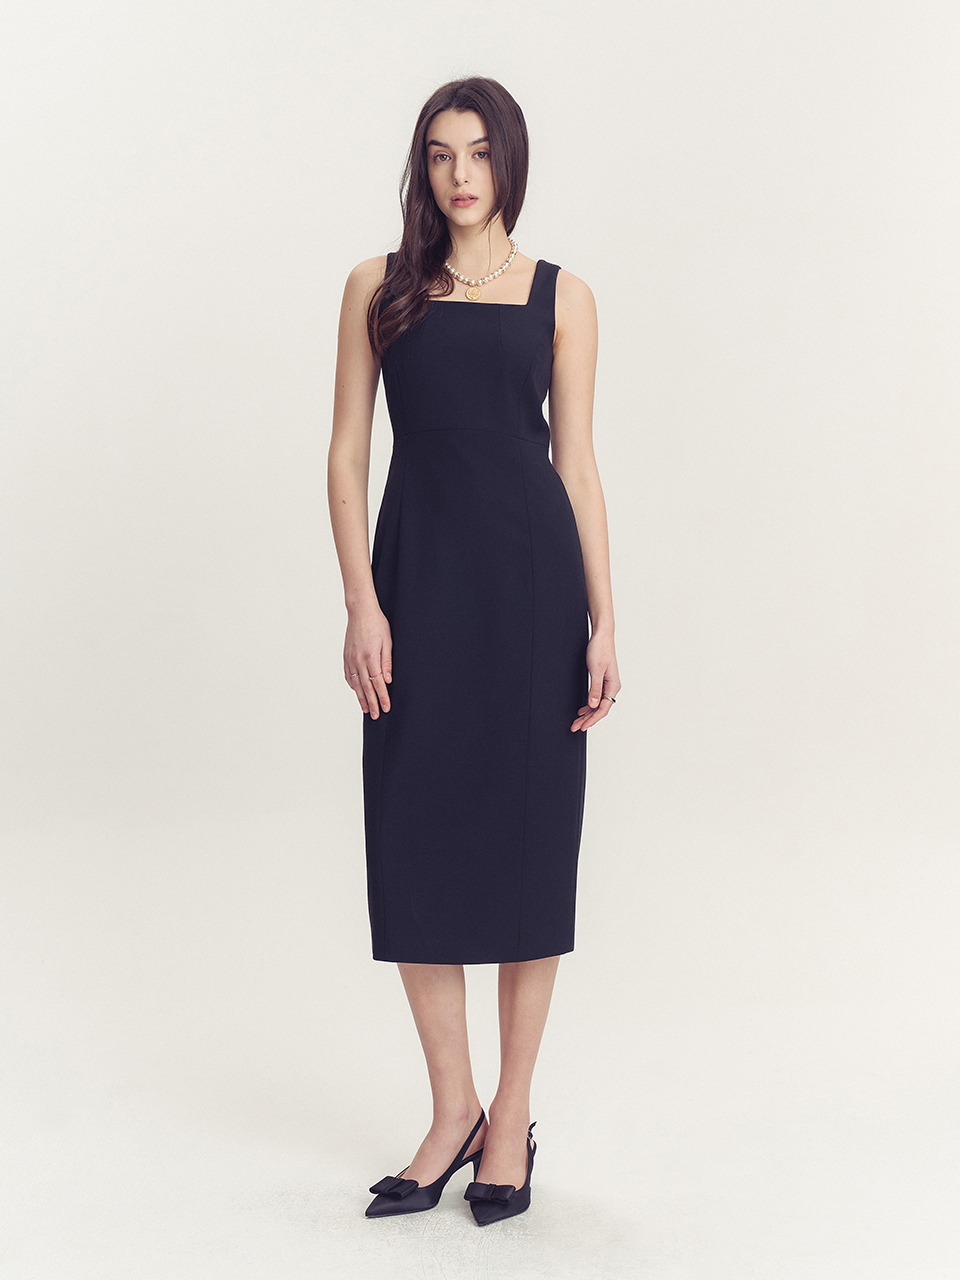 Rose Square Line Dress - Black (13th pre-order delivery to be delivered on 3/29)